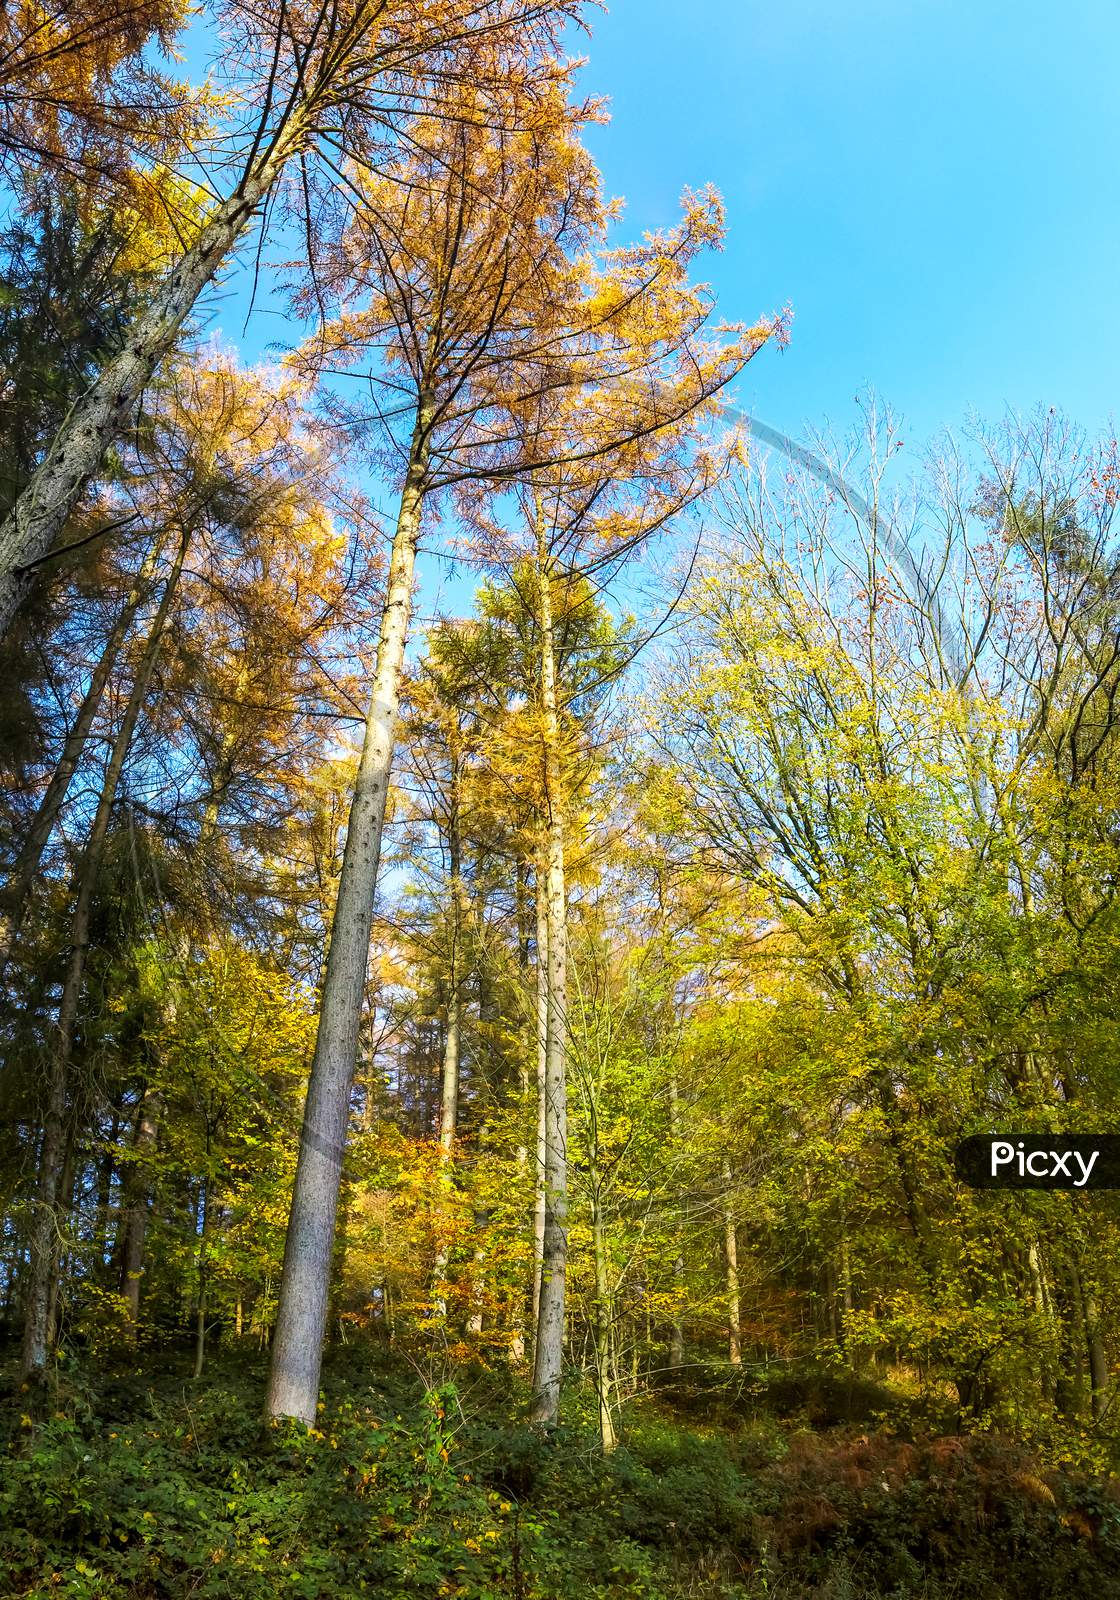 View Into A Vibrant And Colorful Autumn Forest With Fall Foliage And Sunlight Beams